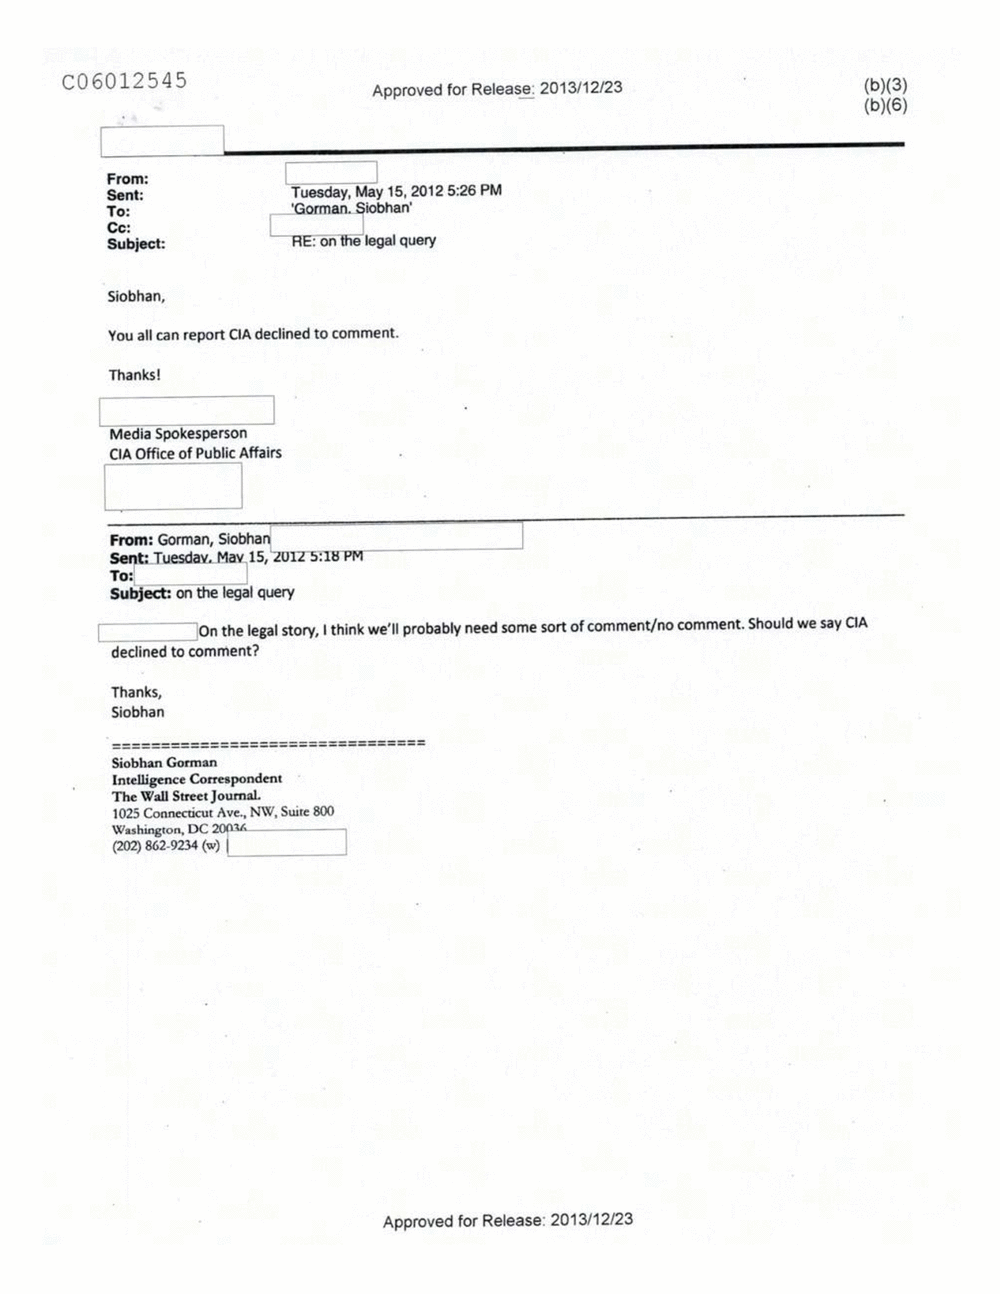 Page 79 from Email Correspondence Between Reporters and CIA Flacks